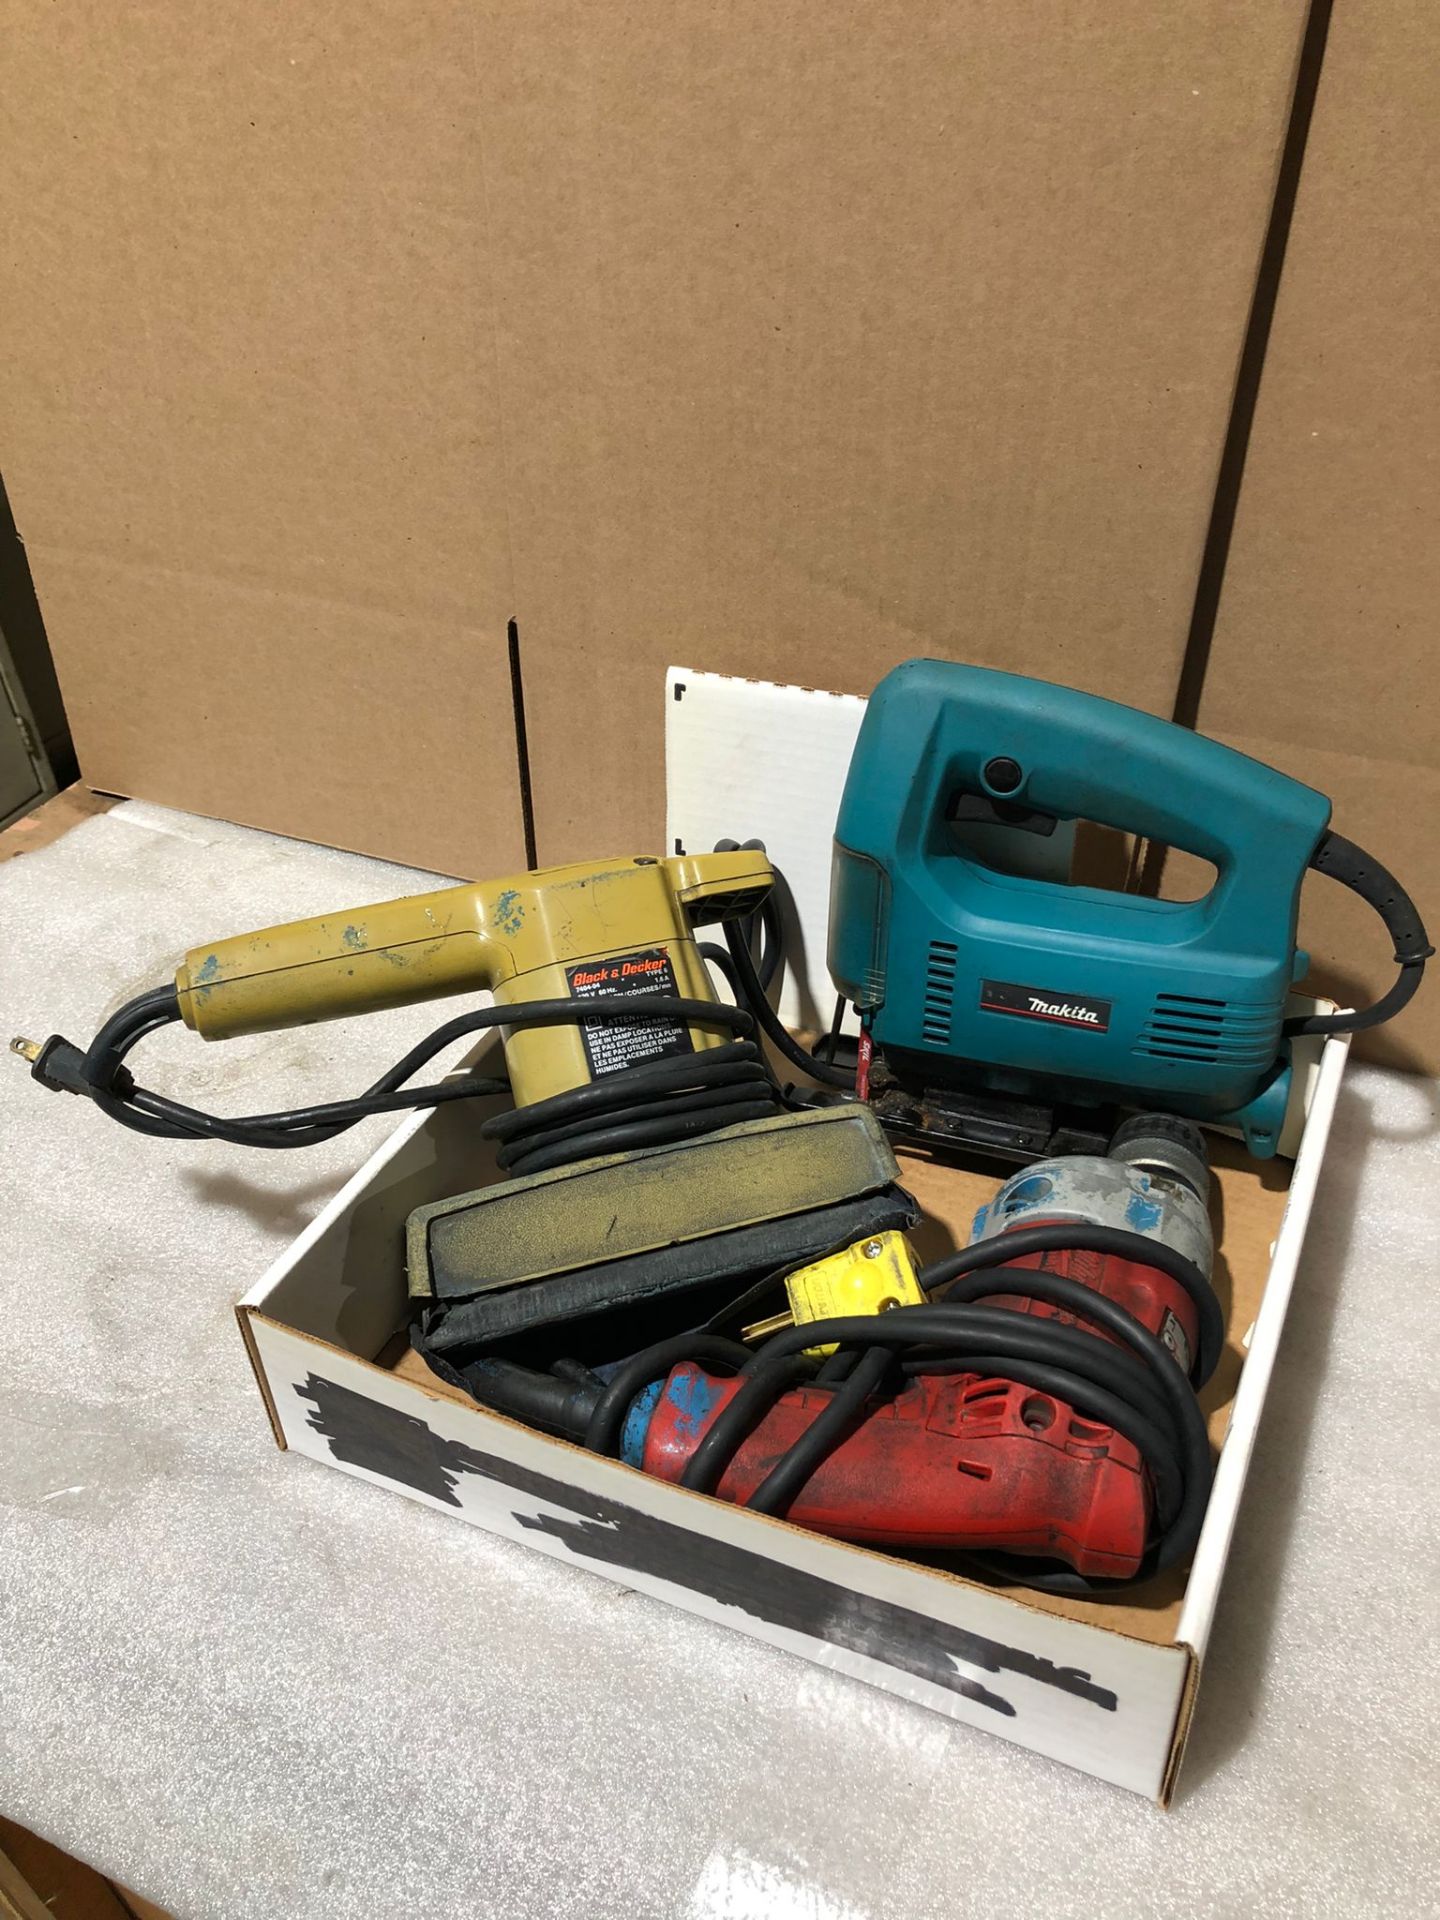 Lot of 3 (3 units) Hand tools - Makita Jig Saw, Finishing Sander and Drill Units *** FROM 5-STAR